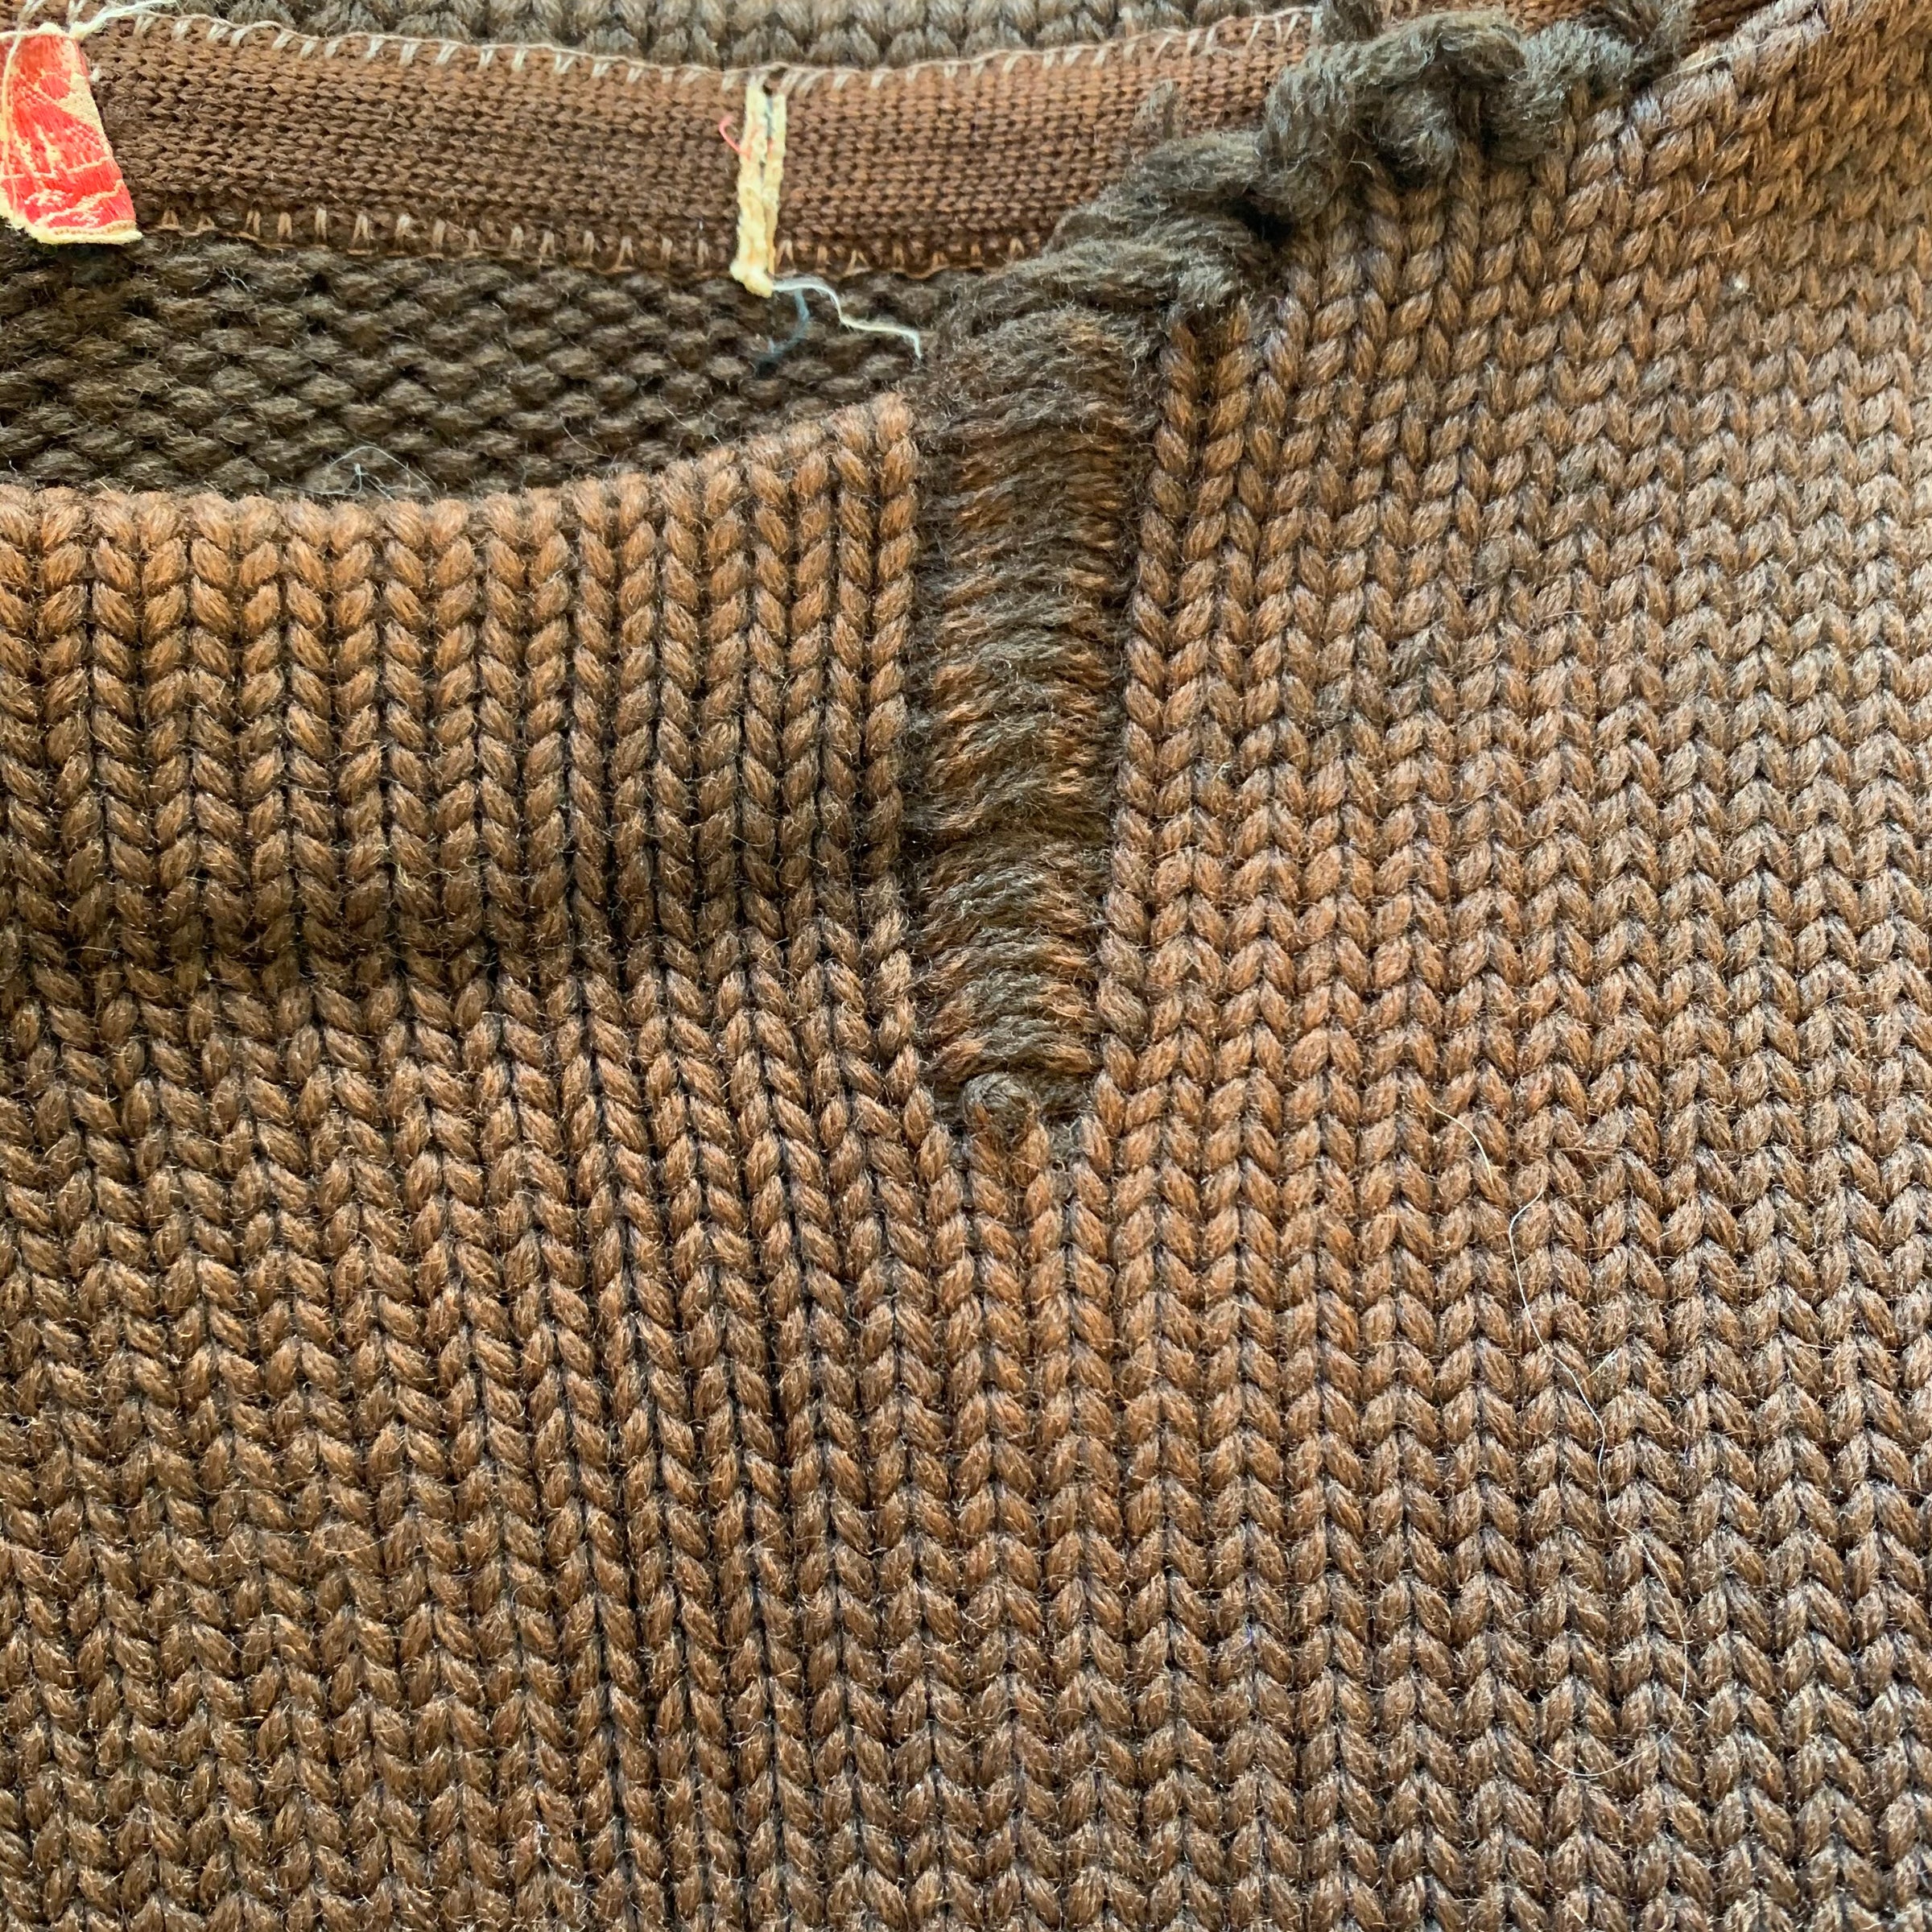 1930’s Brown Boat Neck Football Sweater S/M